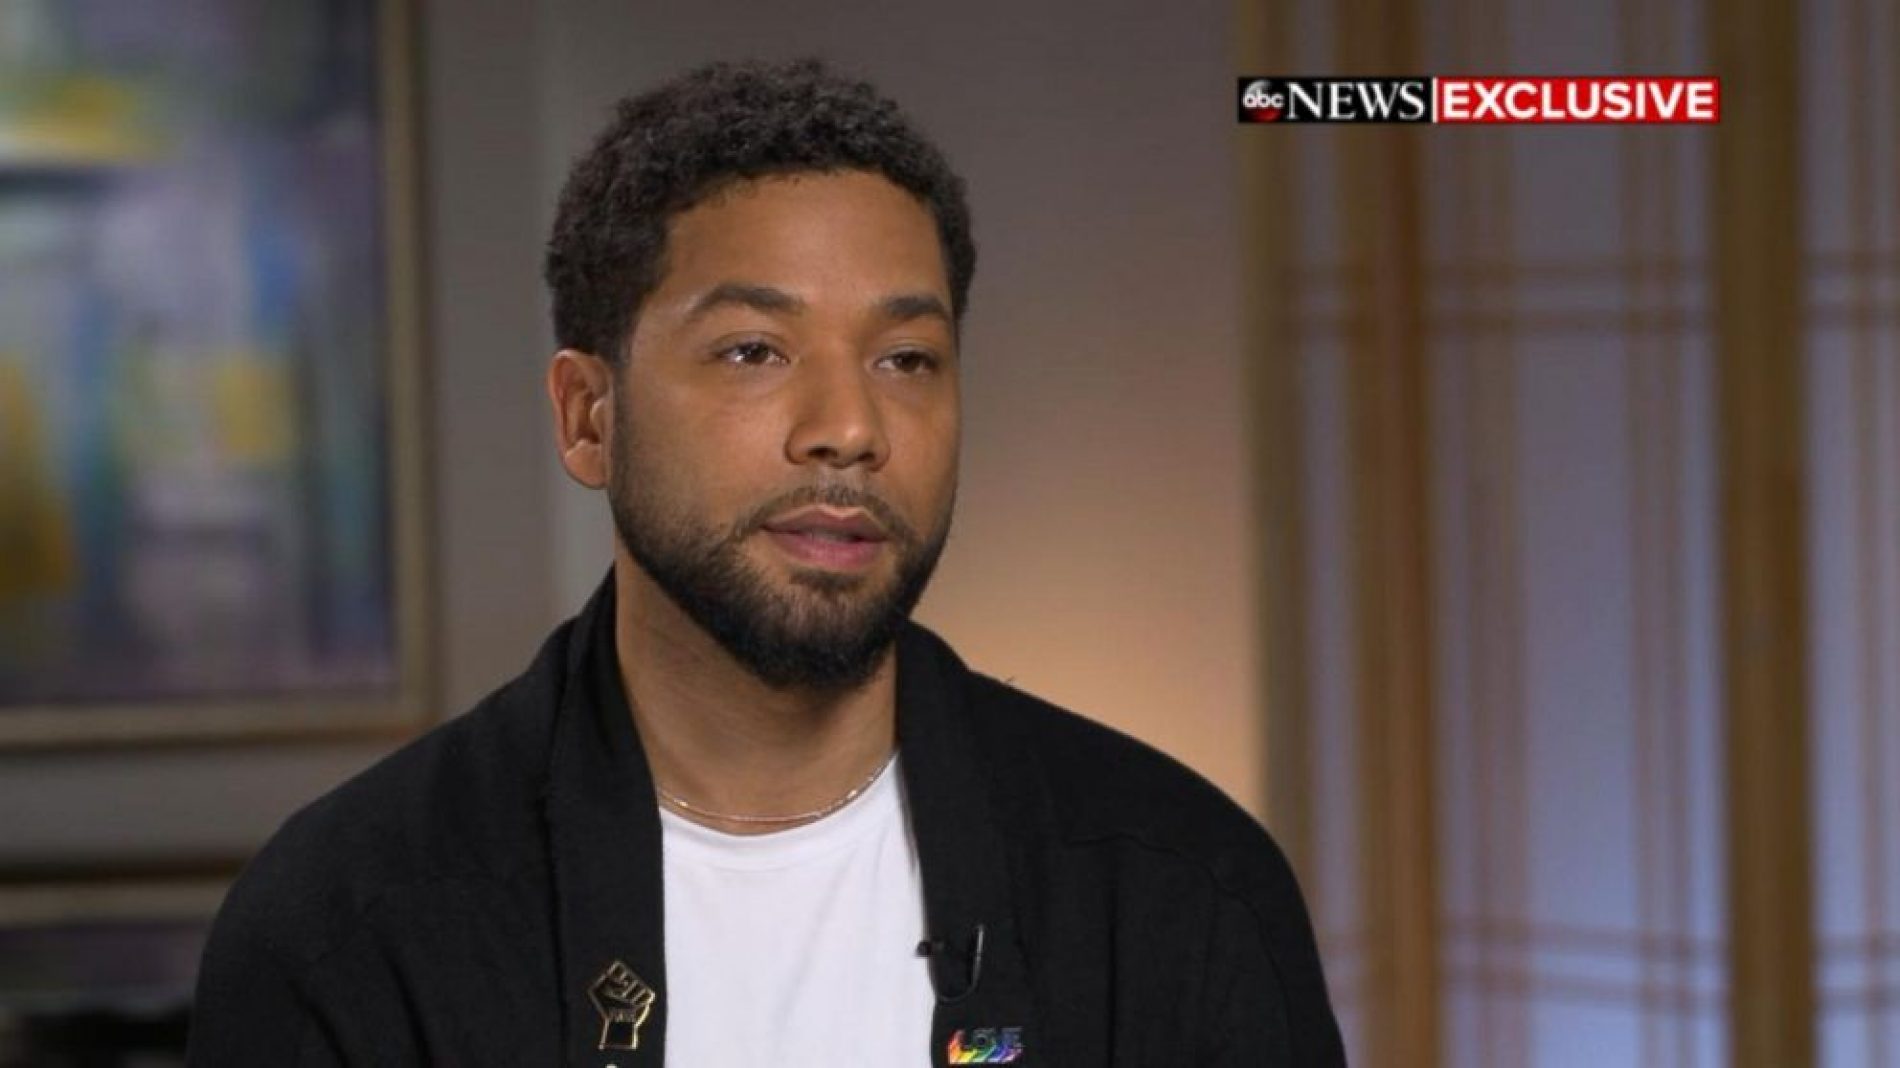 “Be A Fighter.” Jussie Smollett’s message to LBGTQ community after suspected hate crime